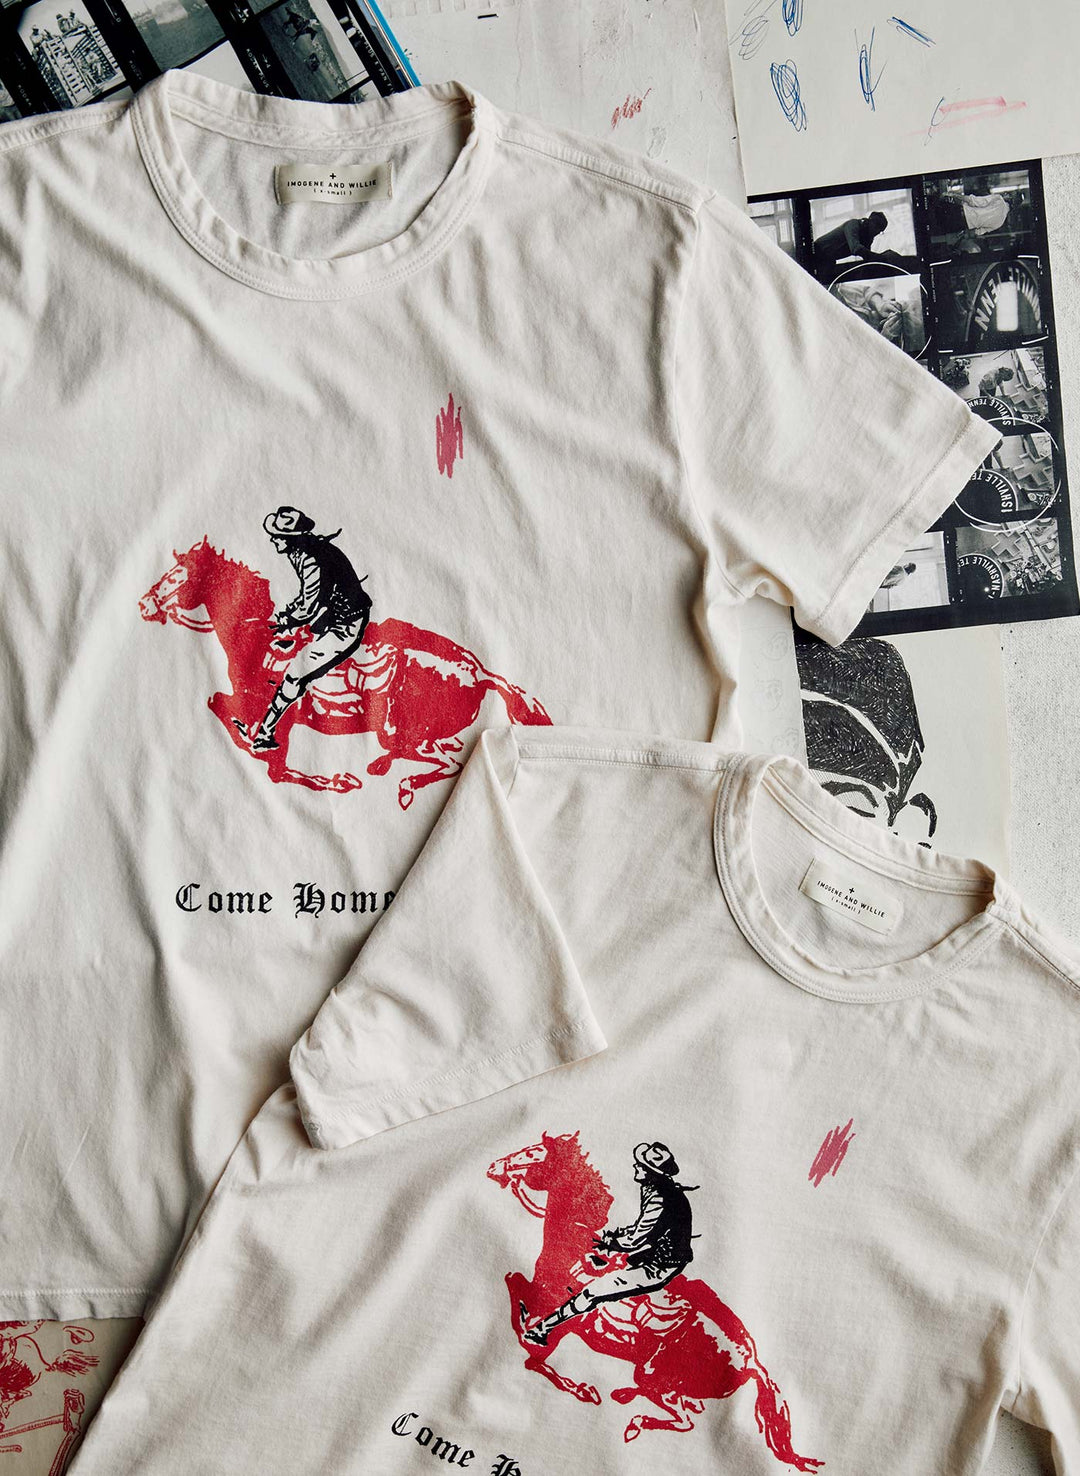 a couple of white shirts with red and black images